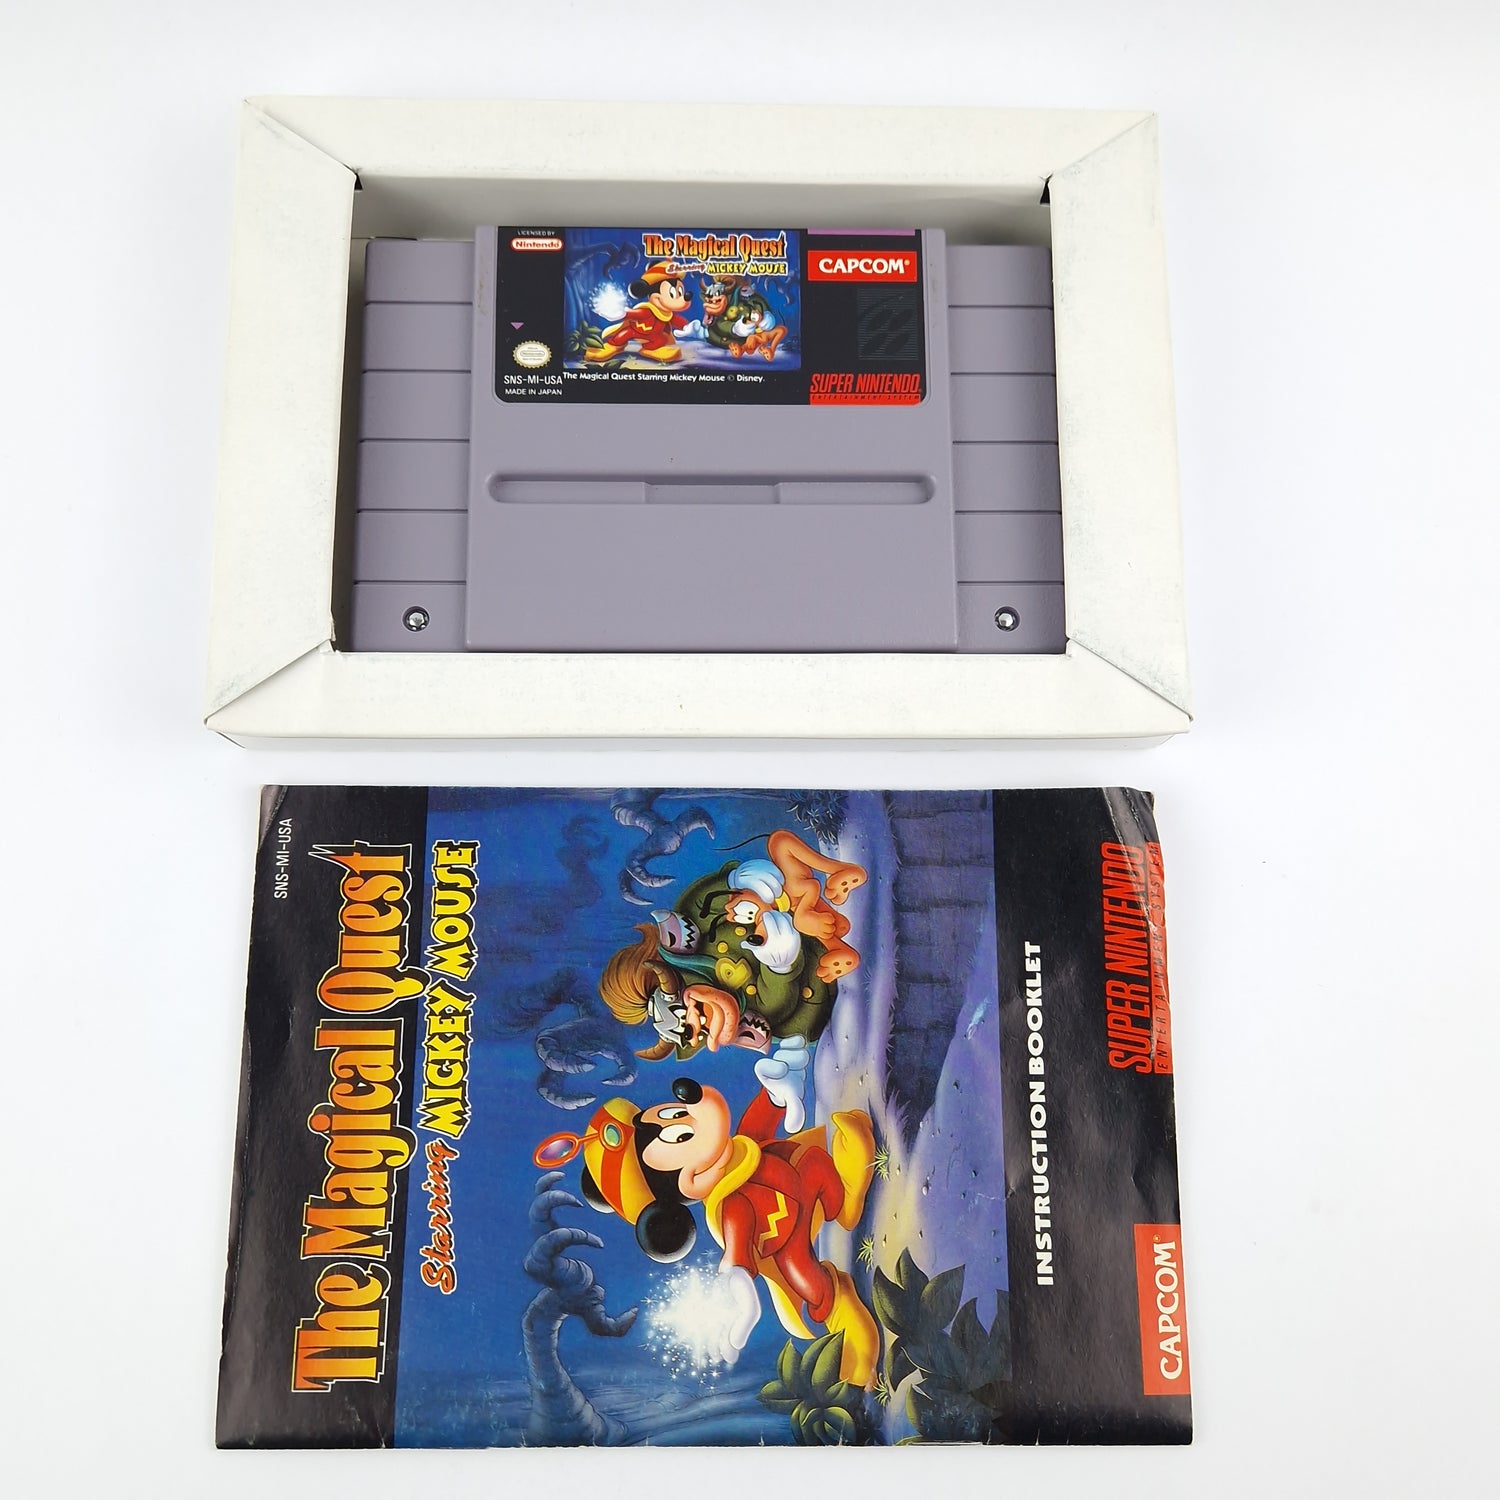 Super Nintendo game: The Magical Quest starring Mickey Mouse - SNES OVP NTSC-U